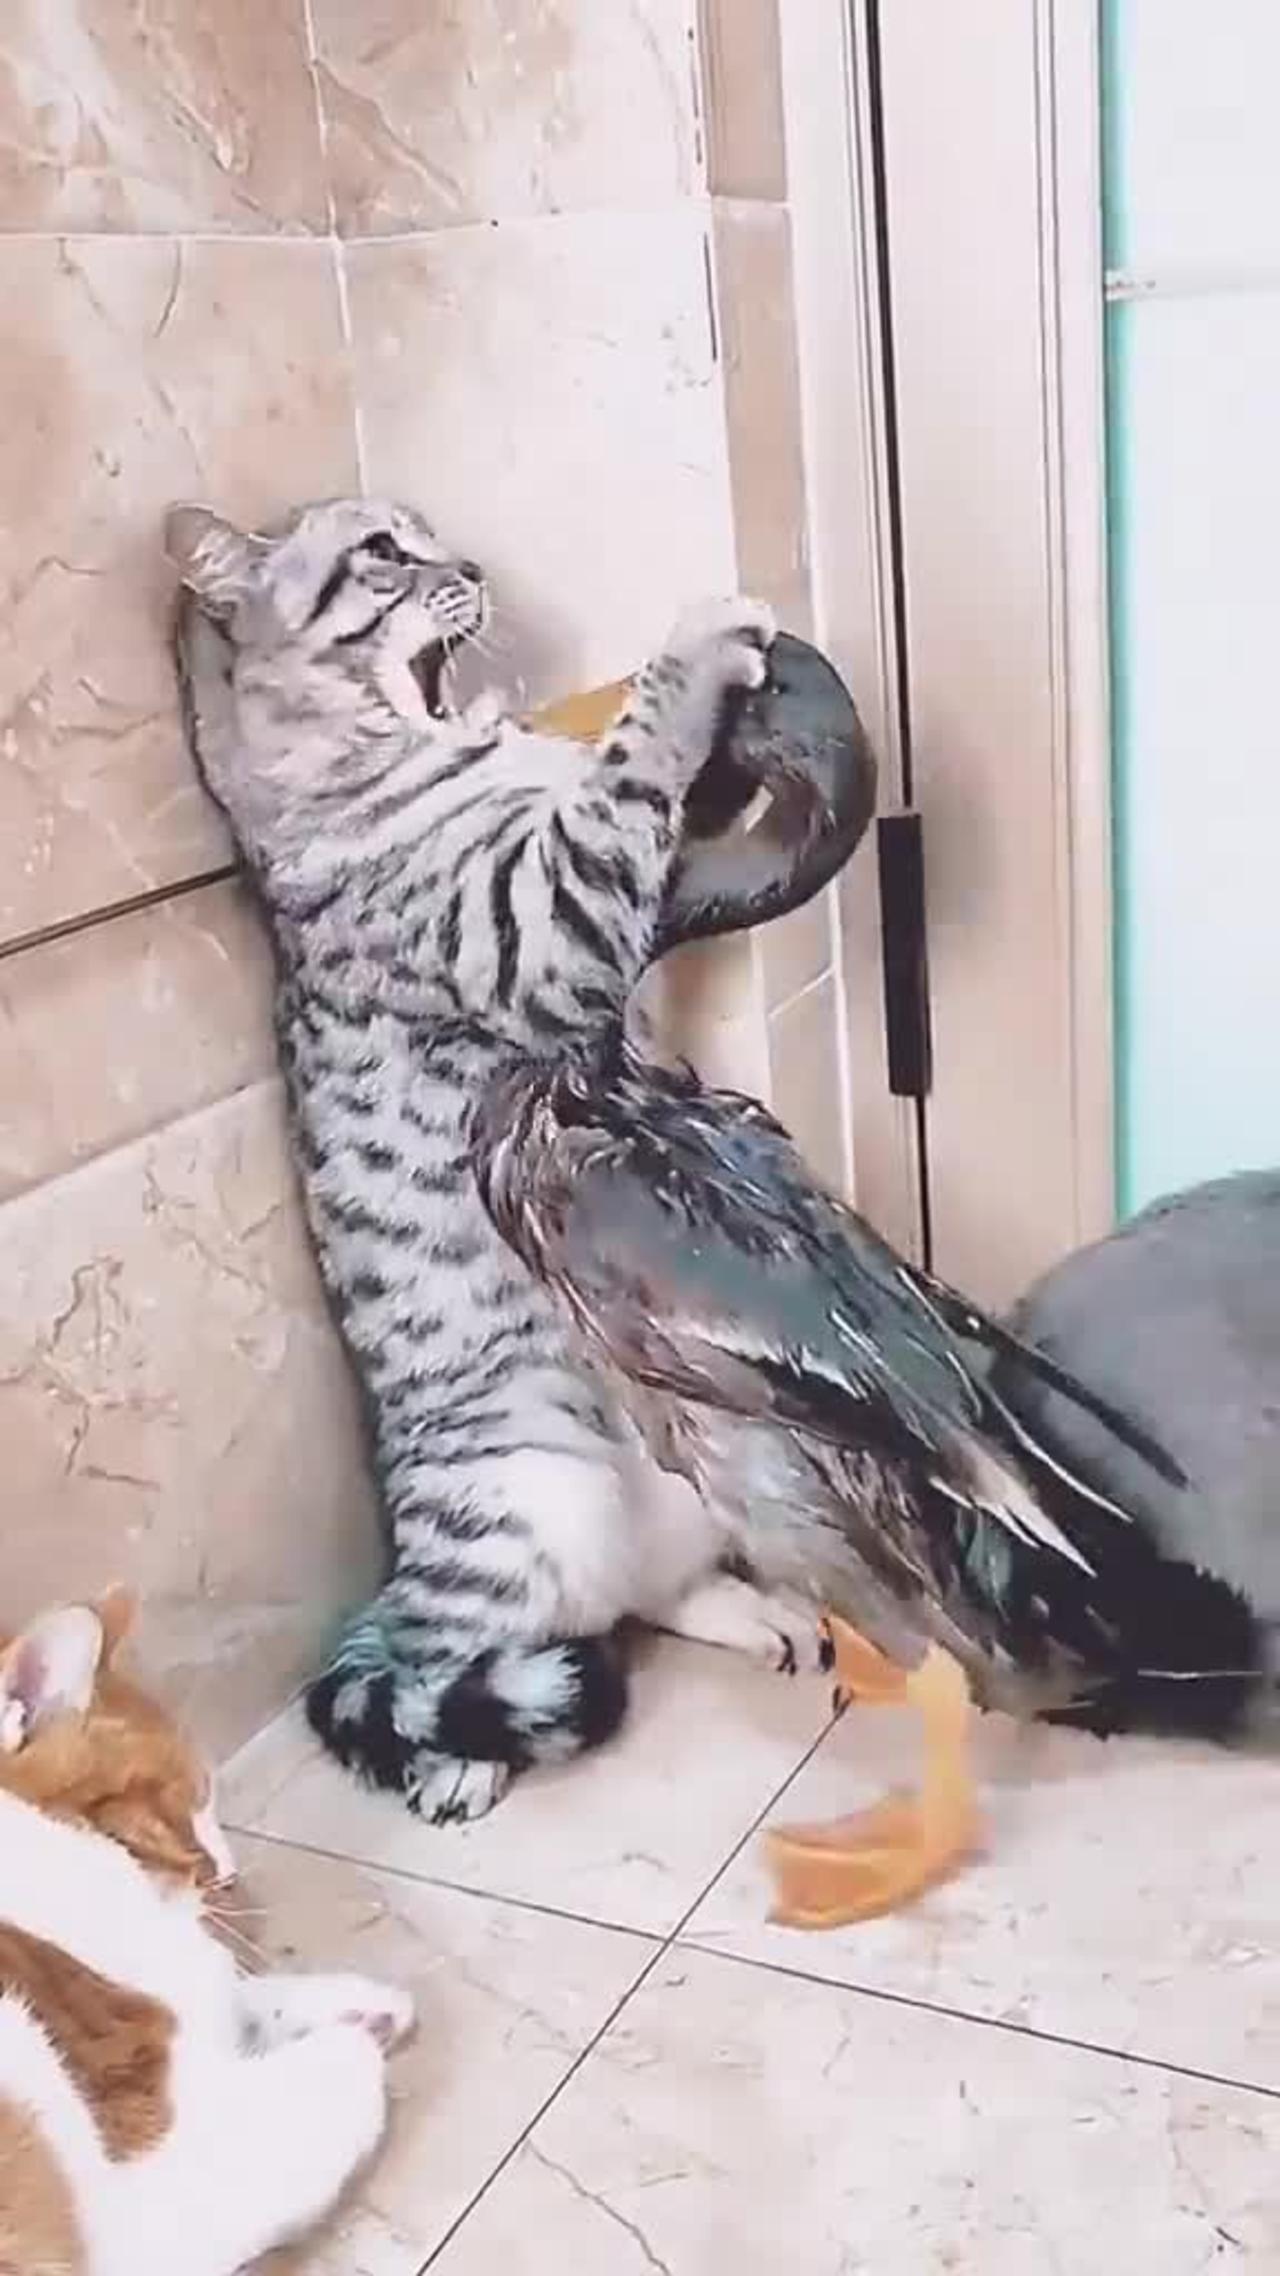 cute behavior of cat and duck fights